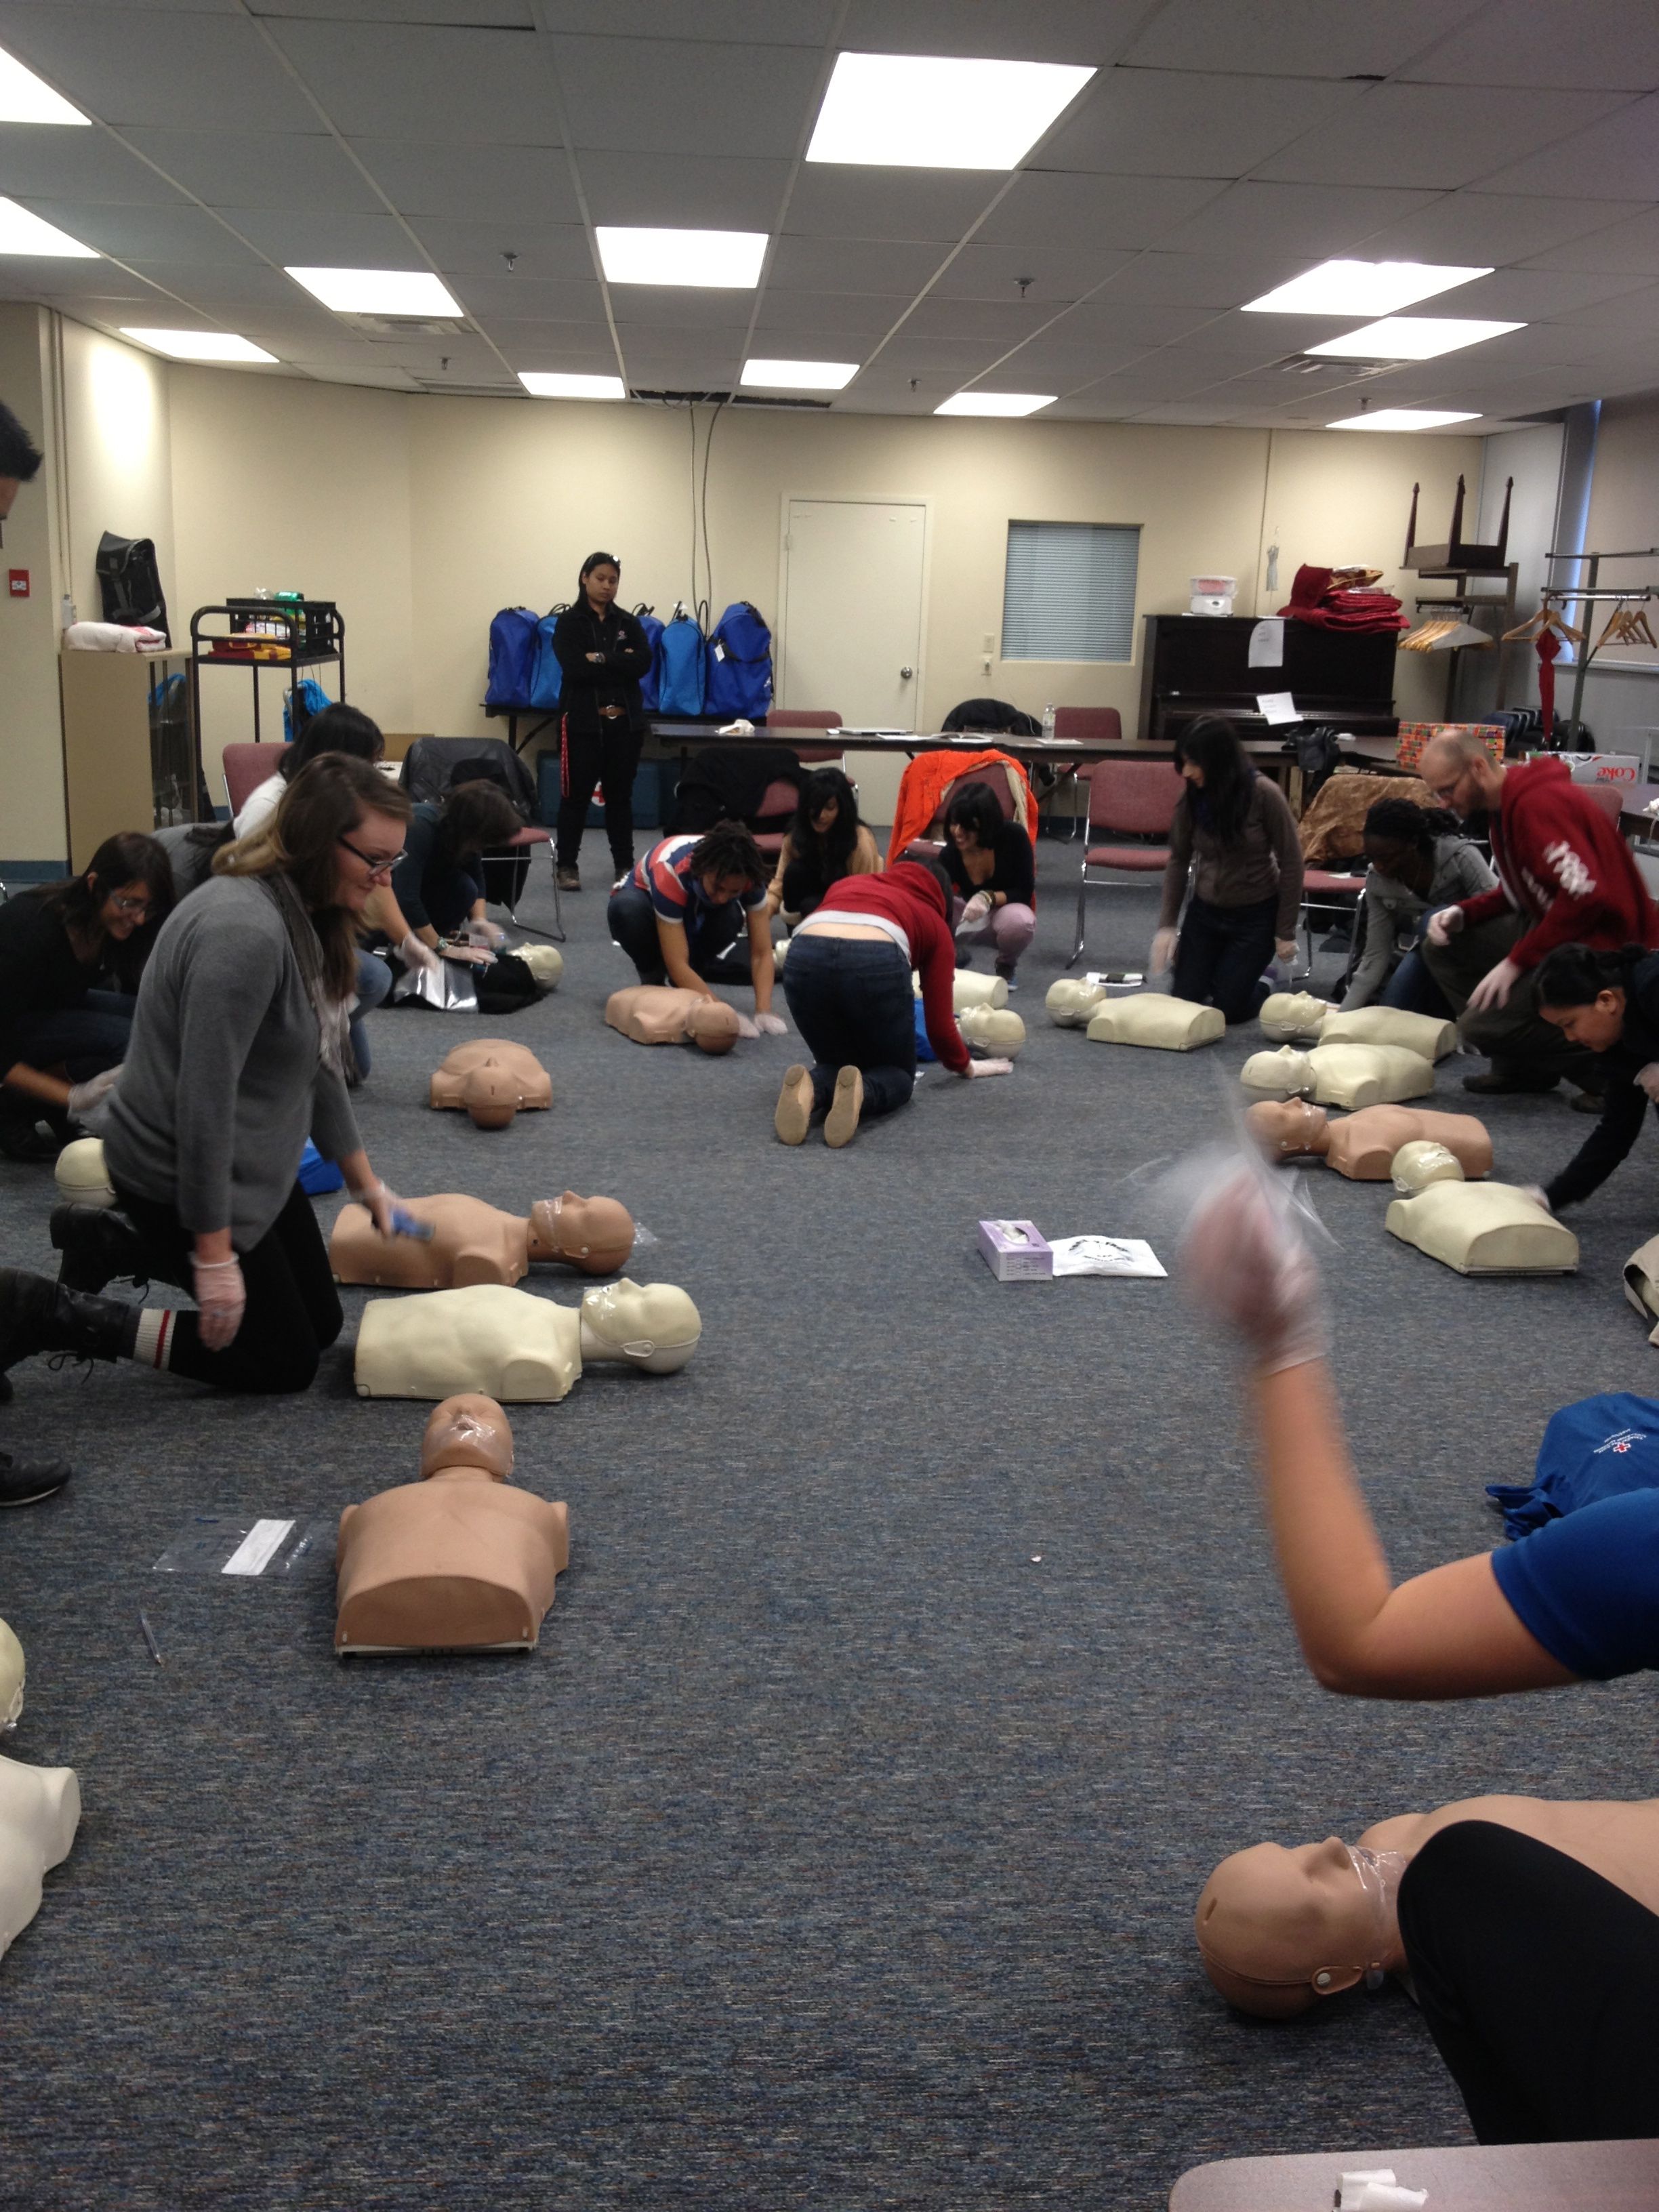 The rest of the class practices CPR on their dummies